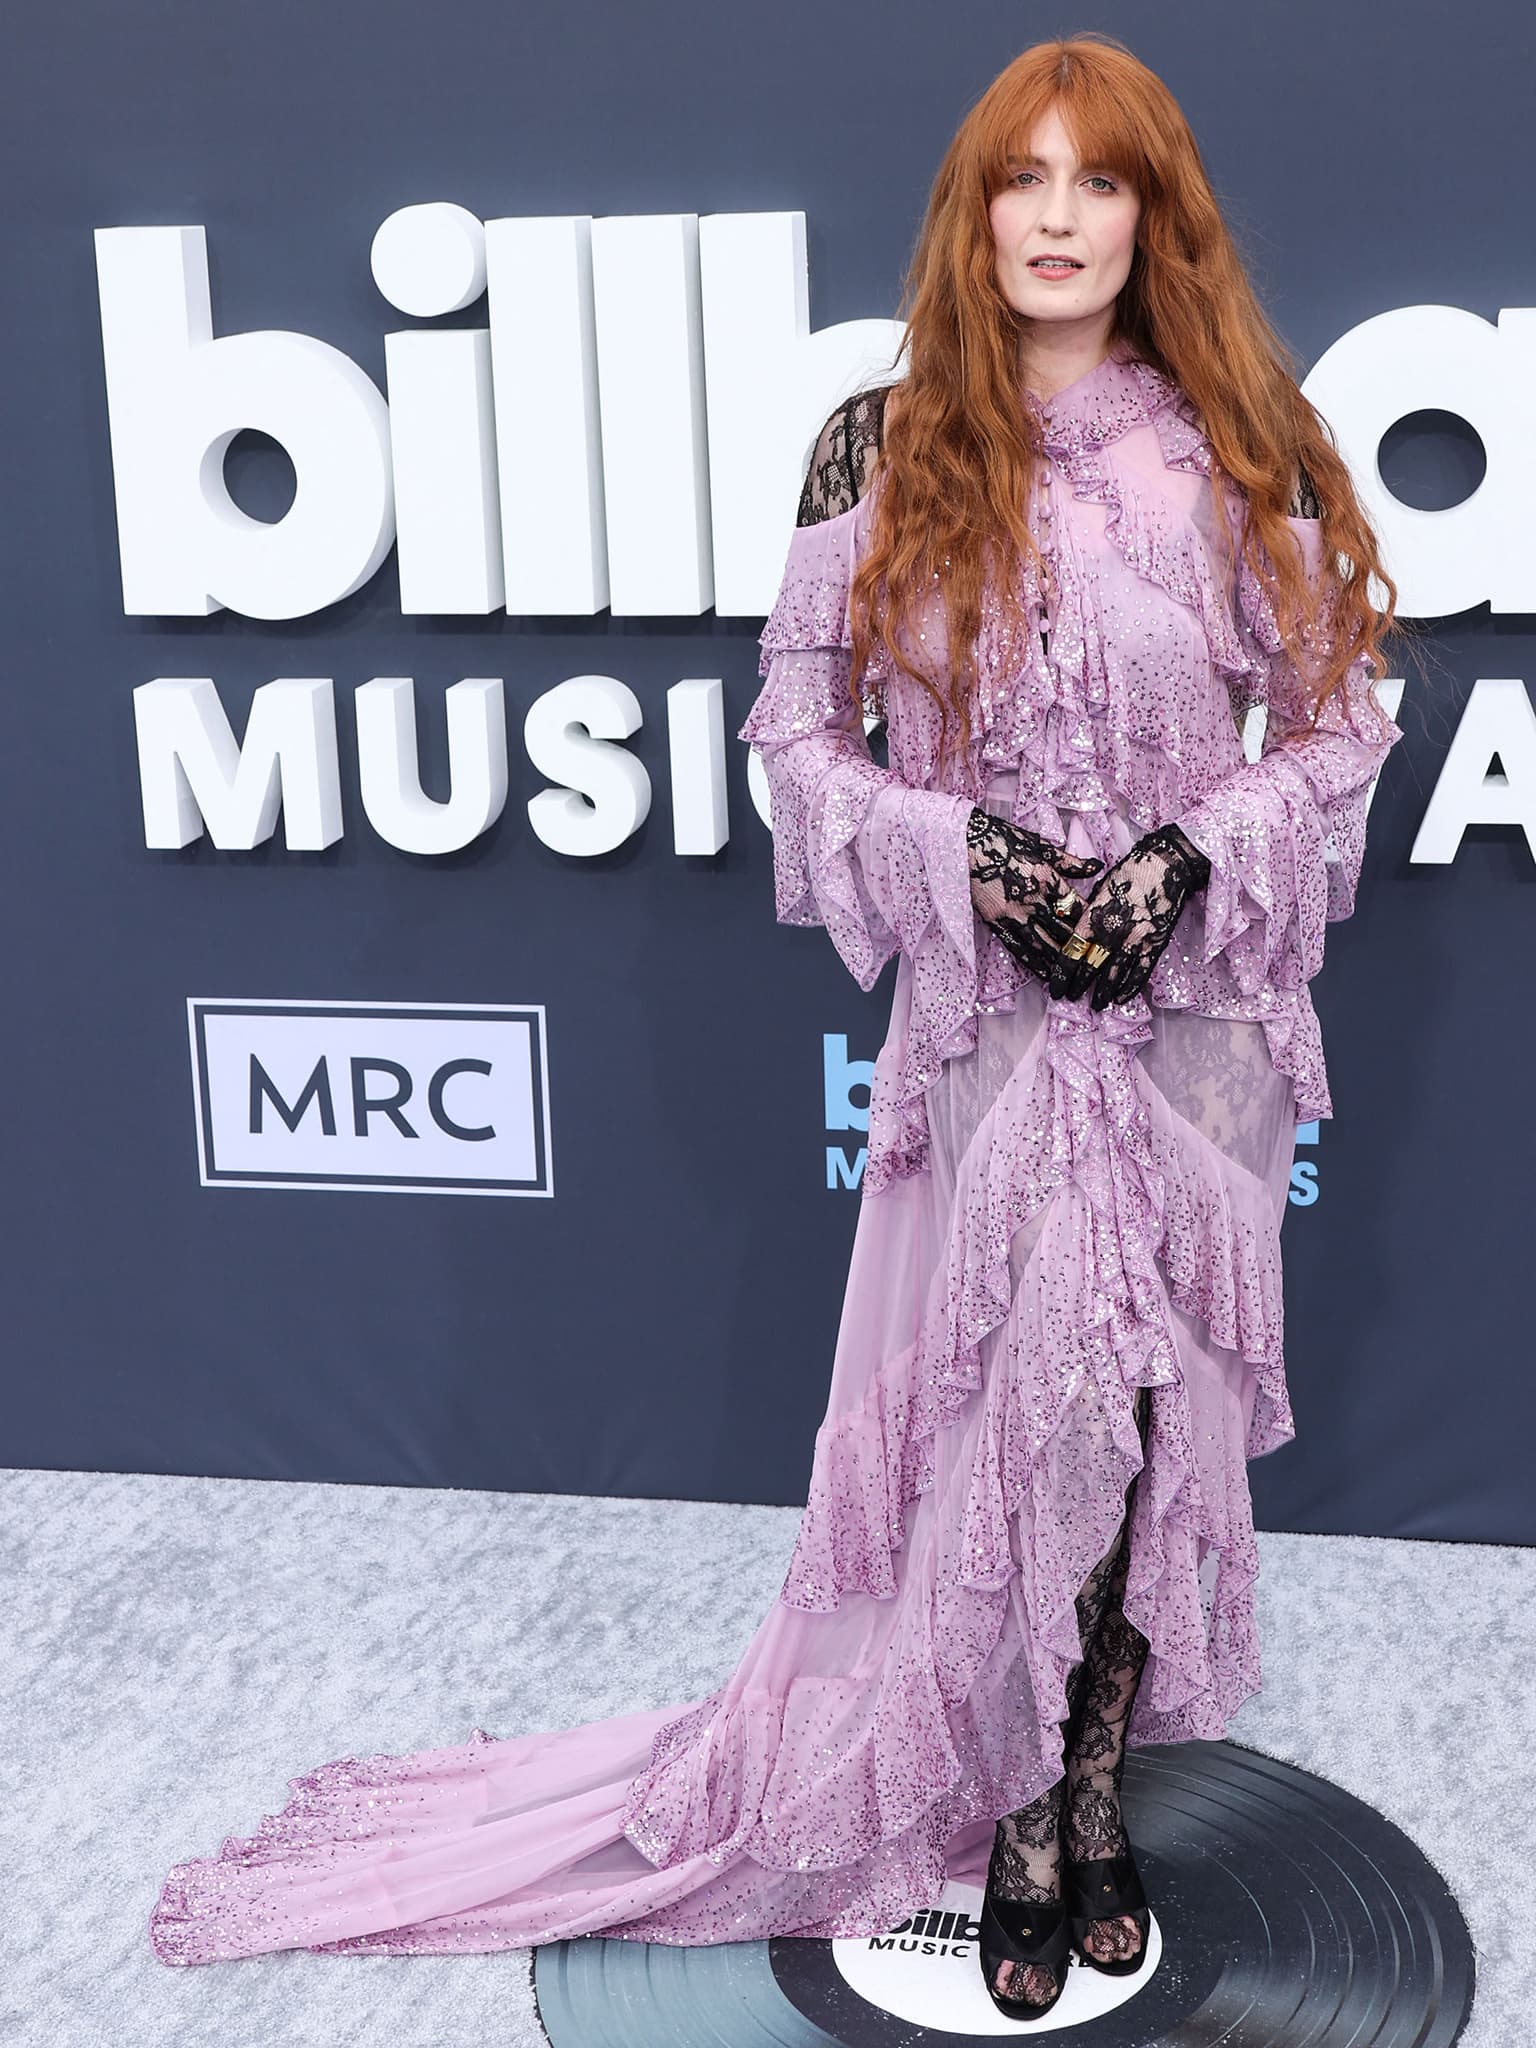 Florence Welch wears a purple sequin-embellished Gucci tiered dress with a black lace catsuit